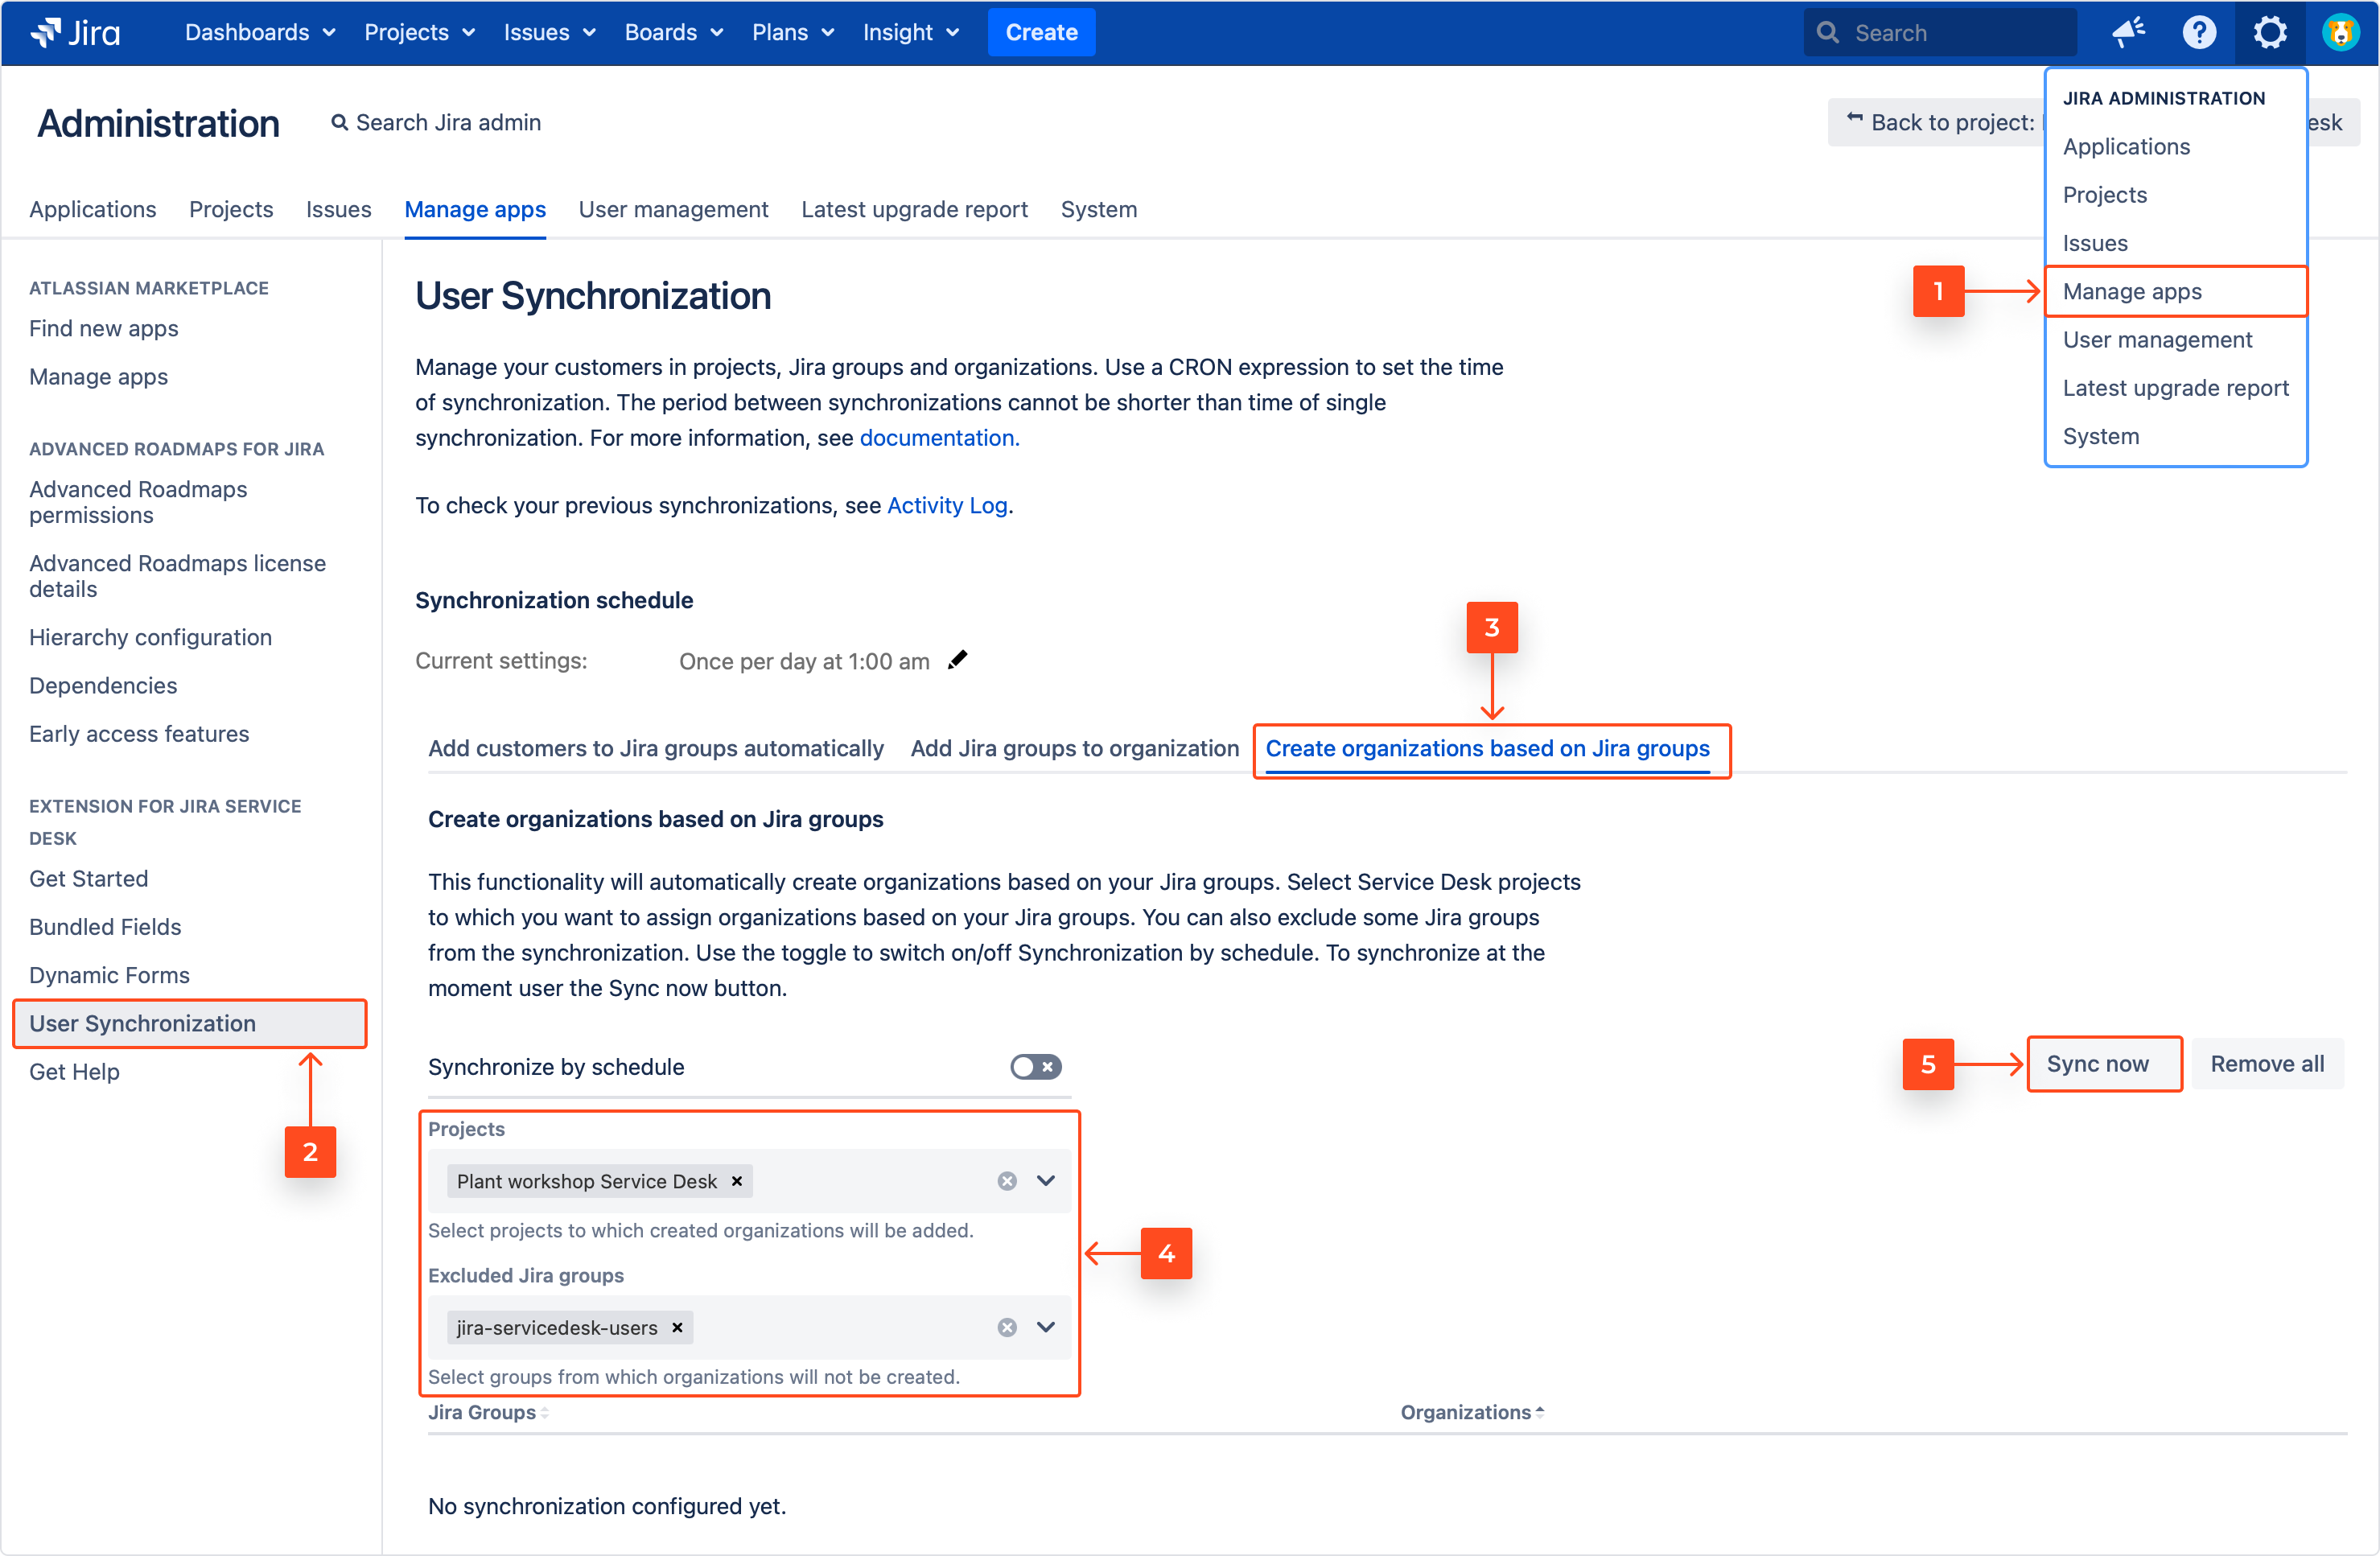 Creating Organizations based on Jira groups with Extension for Jira Service Management by selecting projects and excluded Jira groups